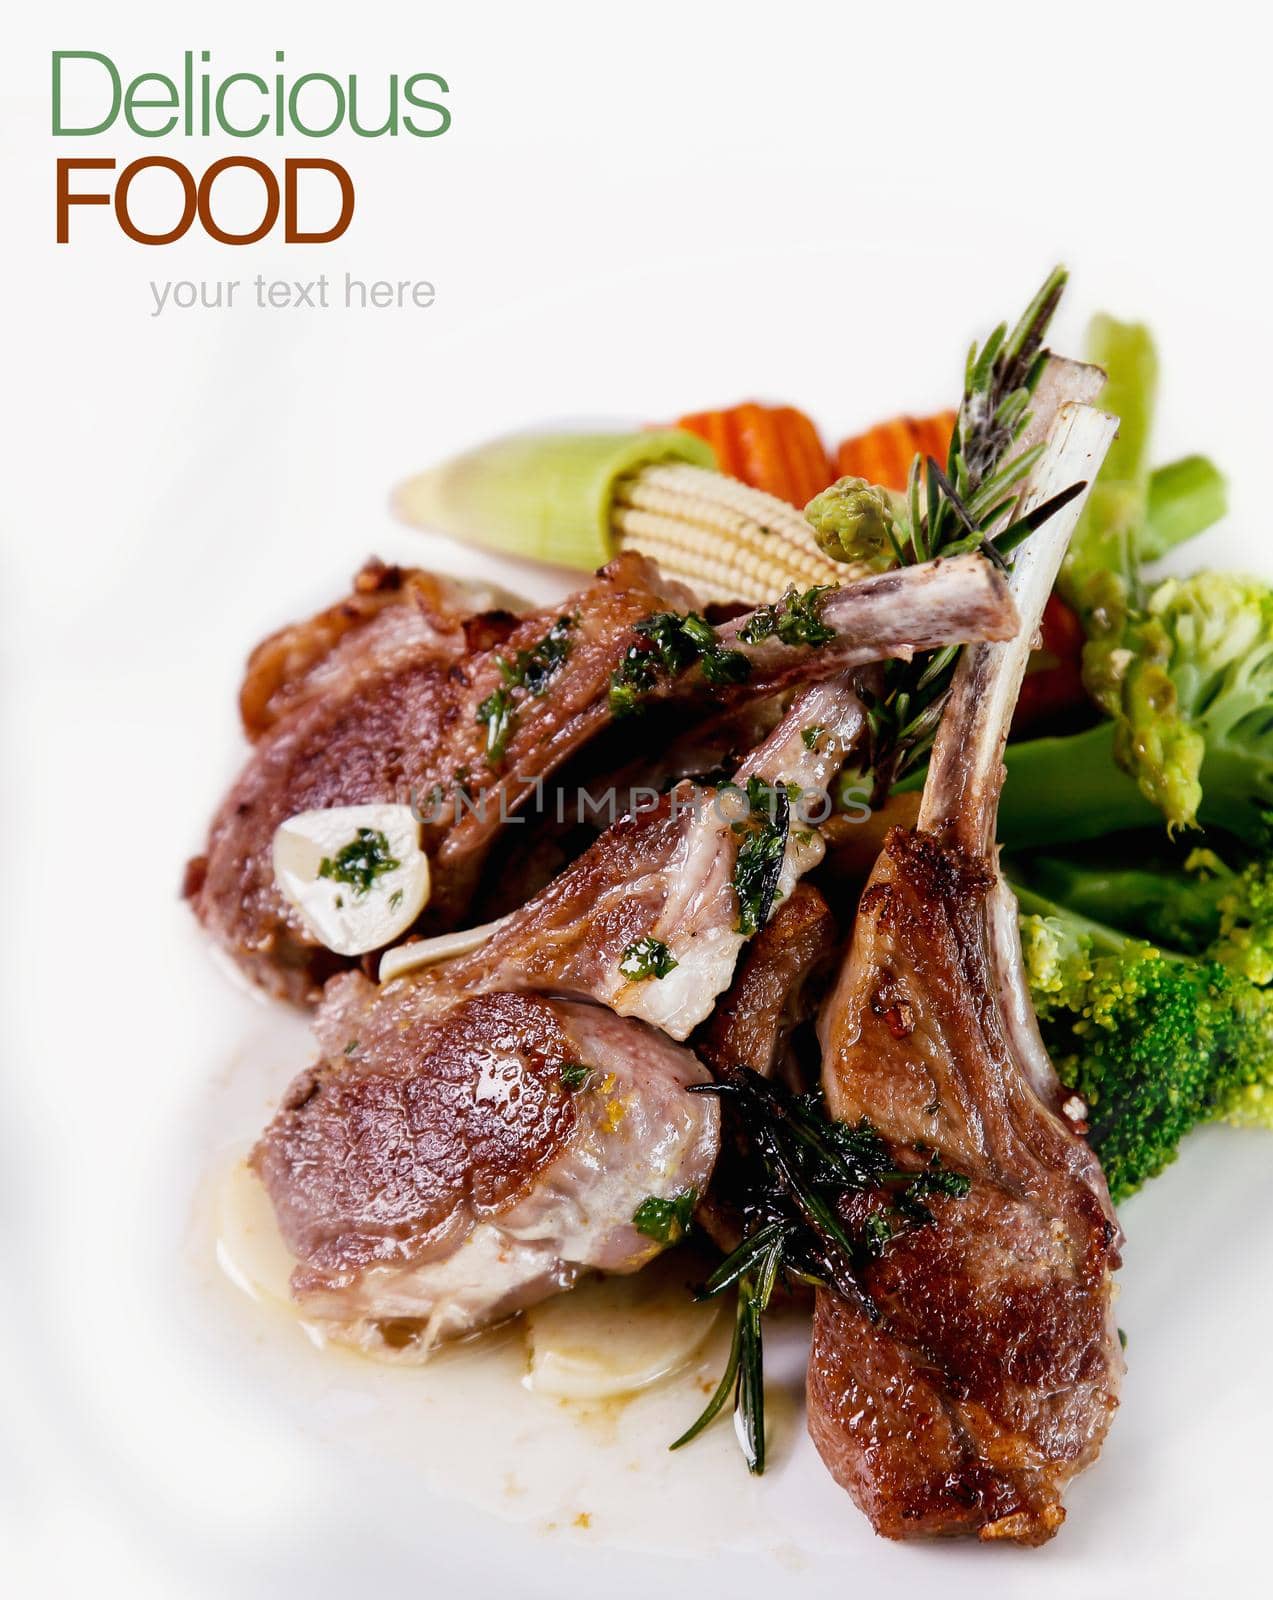 Roasted Lamb Chops with Vegetables and Basil.